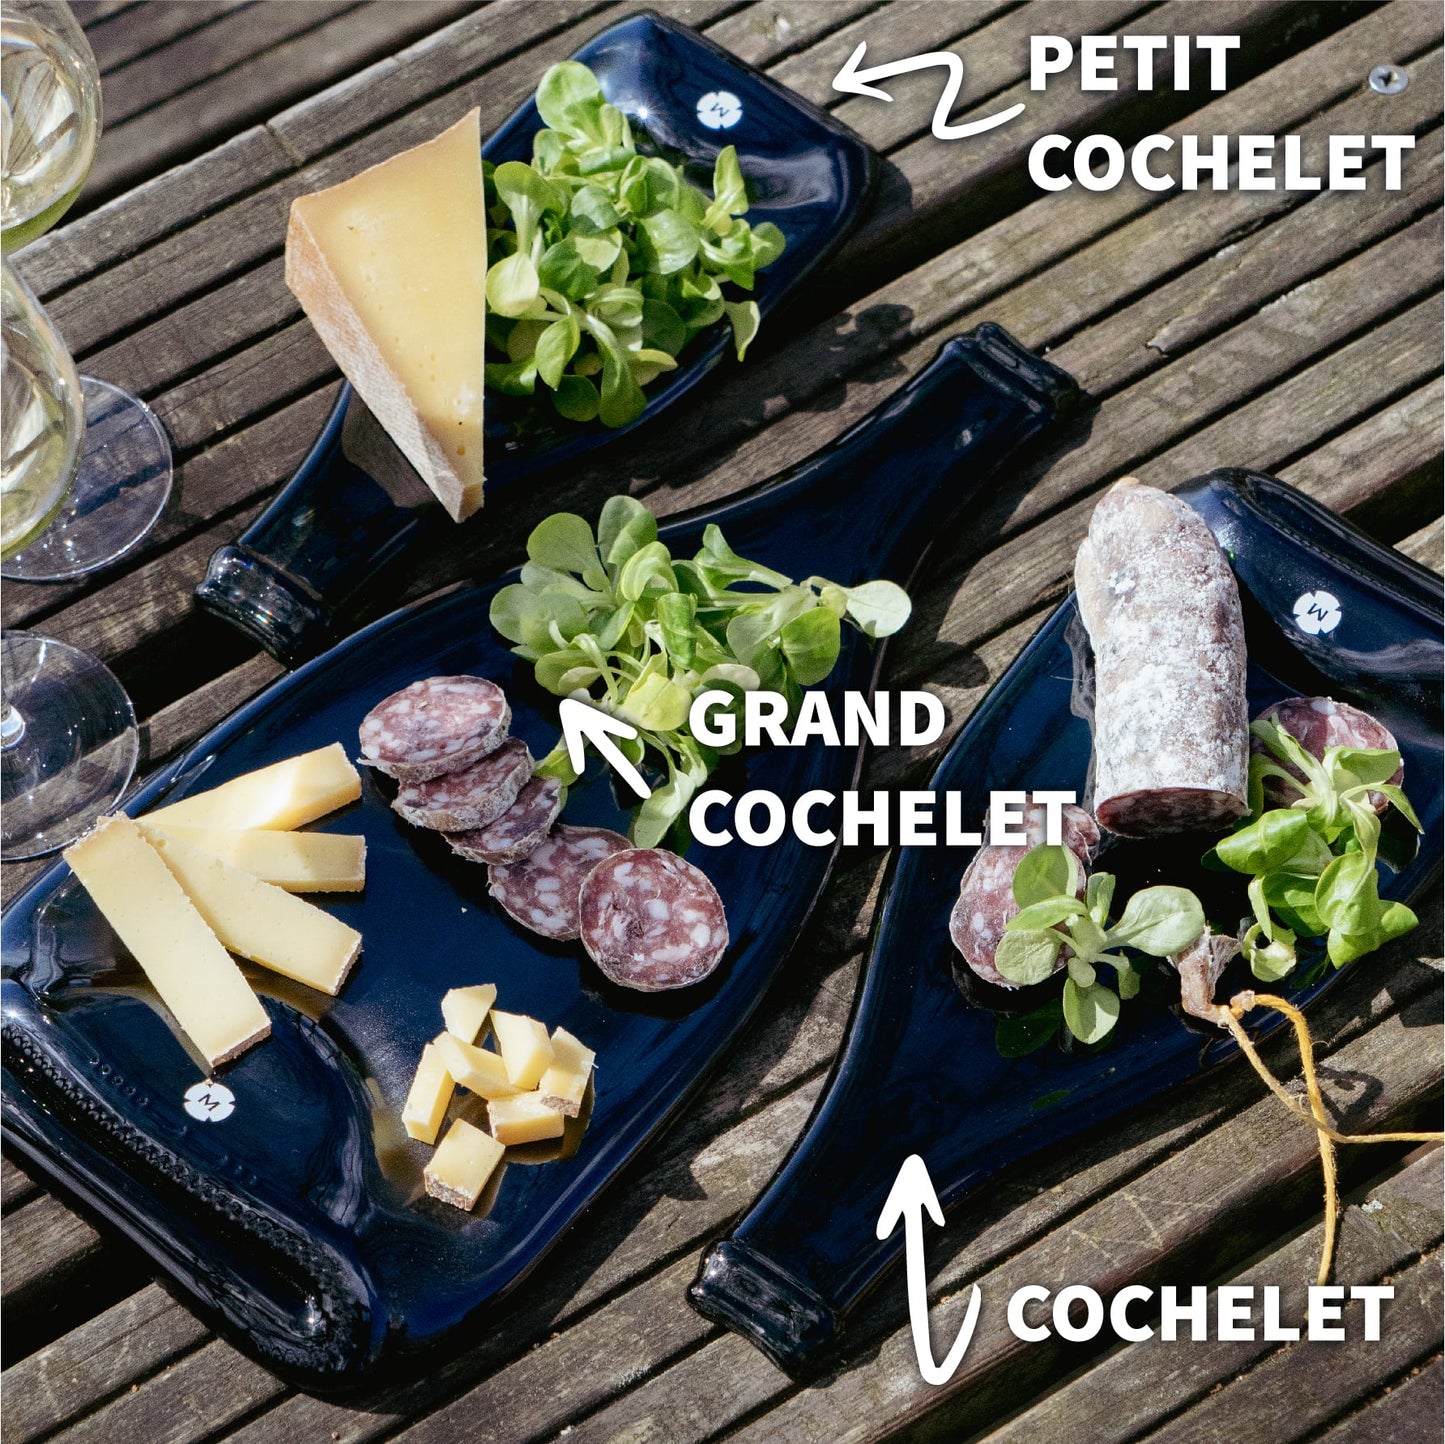 Le grand cochelet 150 cl